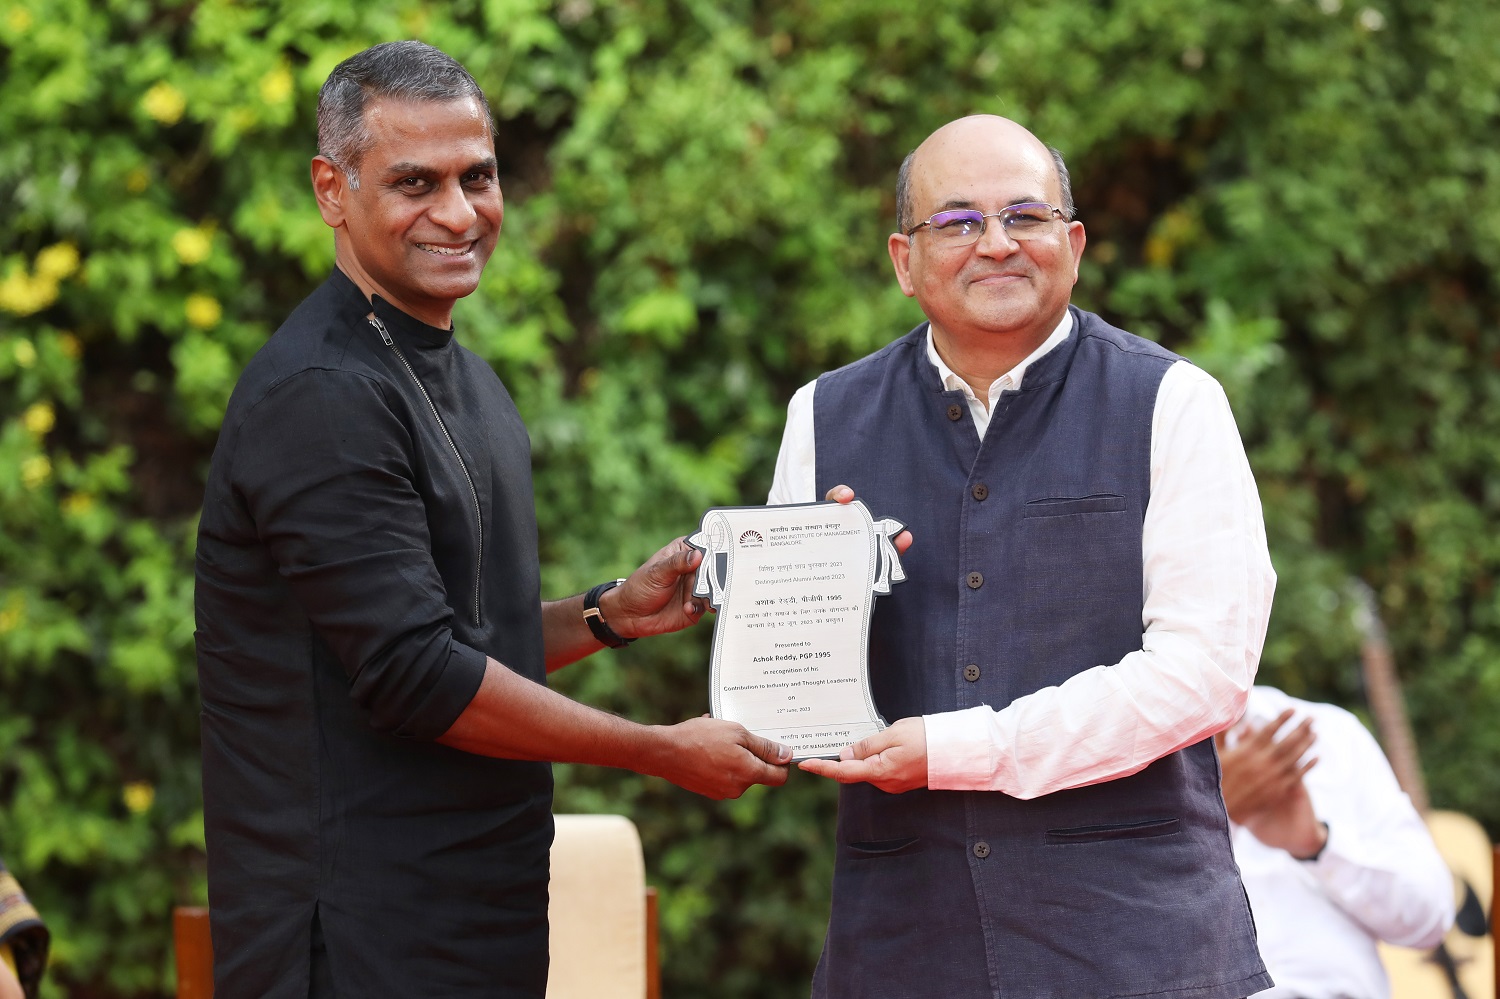 Prof. Rishikesha T Krishnan, Director, IIMB, presents the Distinguished Alumnus Award 2023 to Ashok Reddy, PGP 1995, and Promoter, MD and CEO of TeamLease Services Limited.